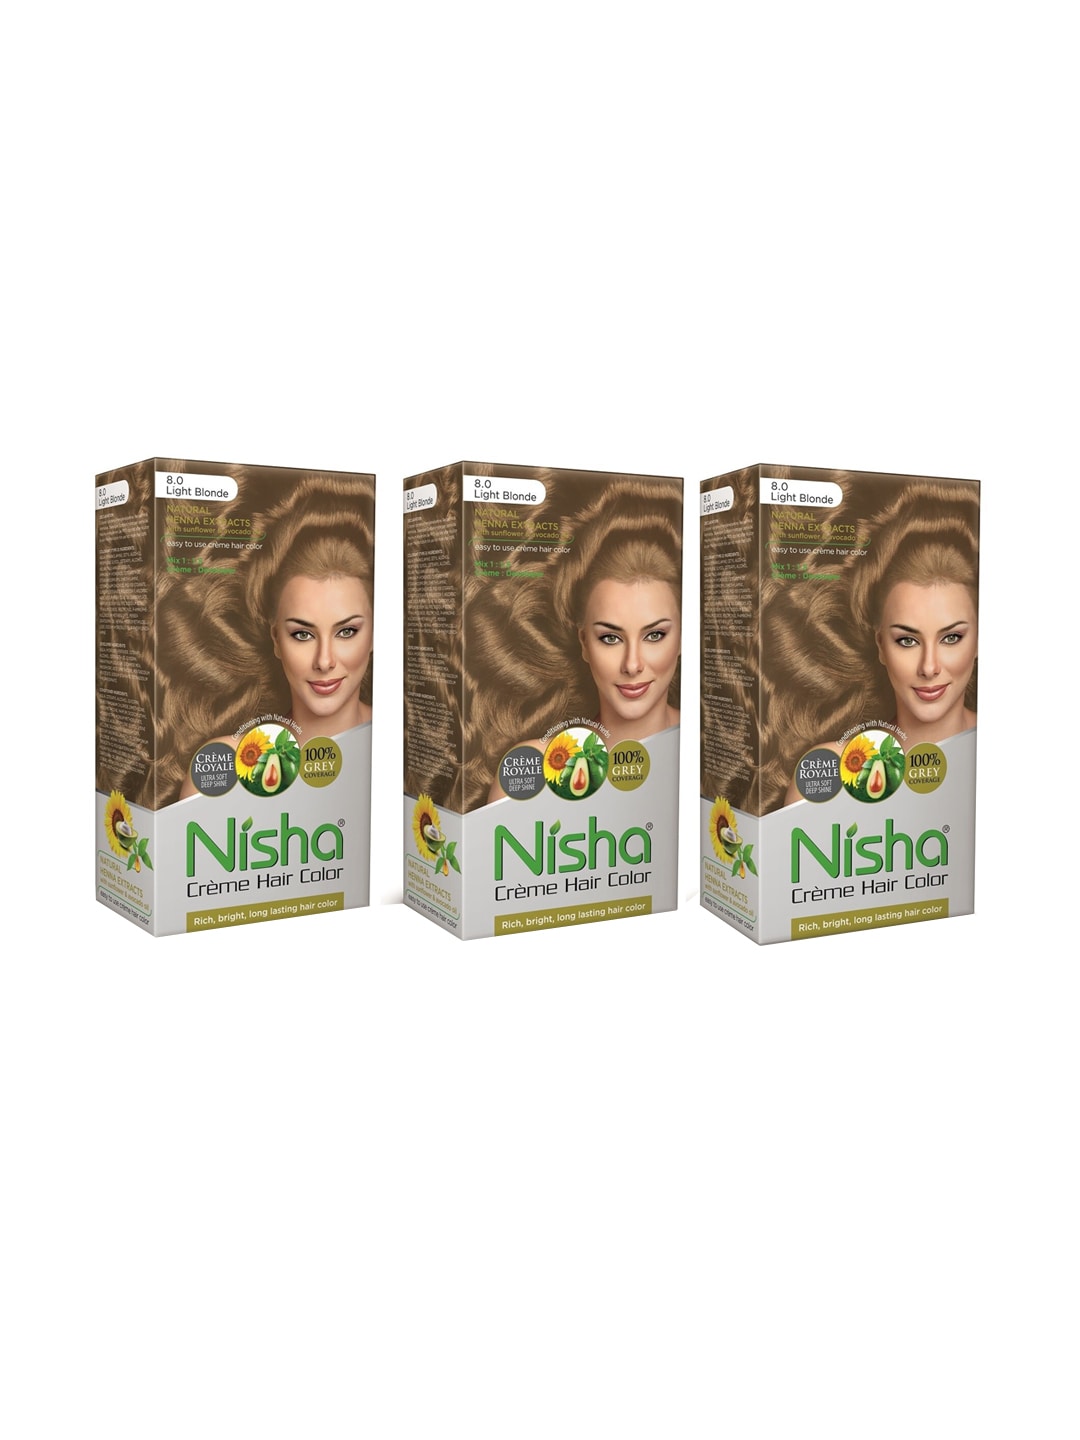 Nisha Unisex Gold Pack of 3 Creme Hair Color 150gm each- Light Blonde Price in India